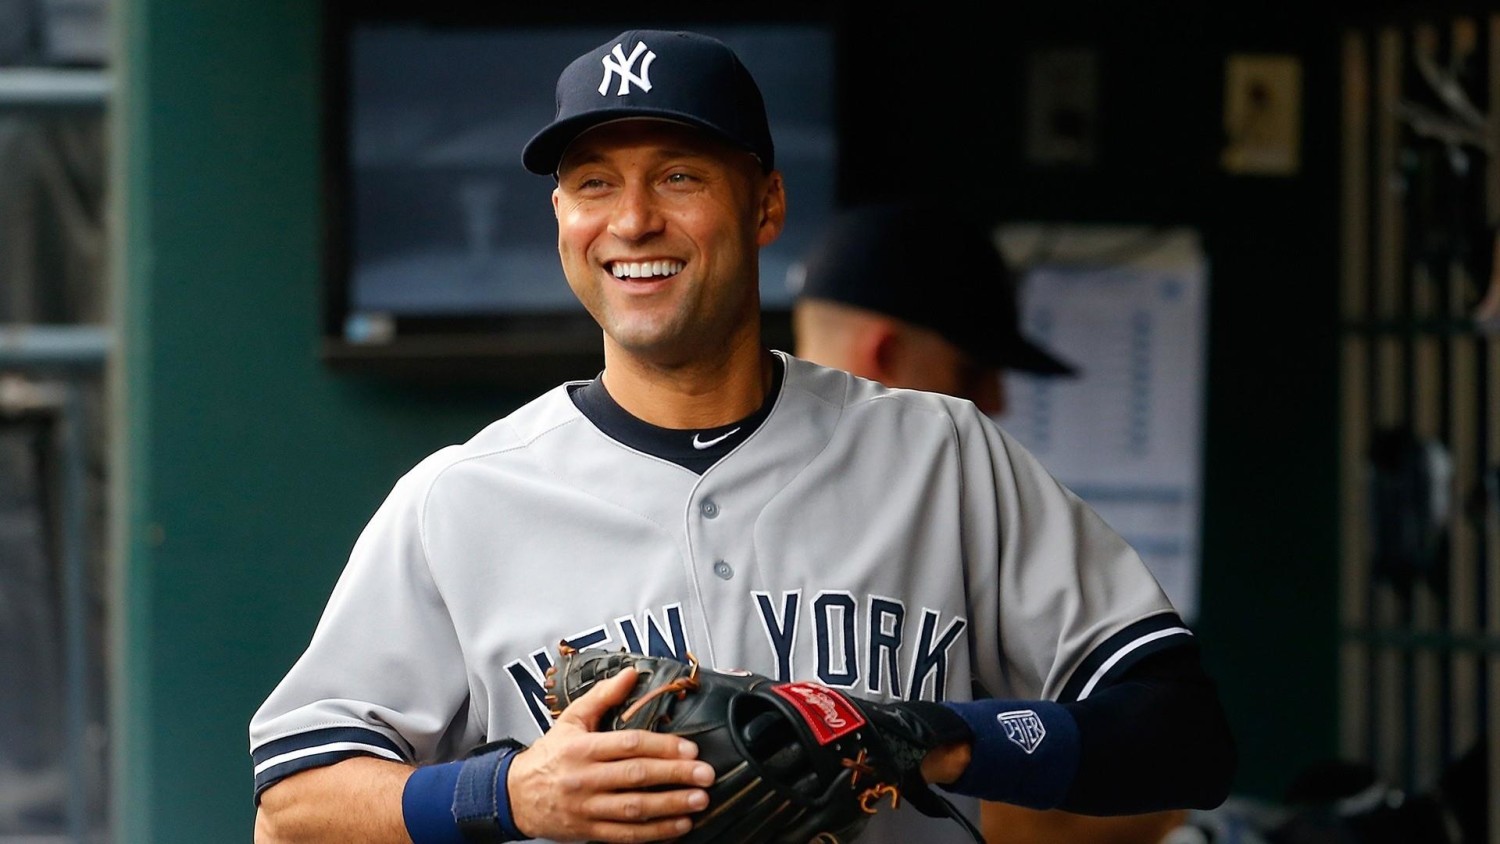 Yankees retire Jeter's No. 2, National Sports